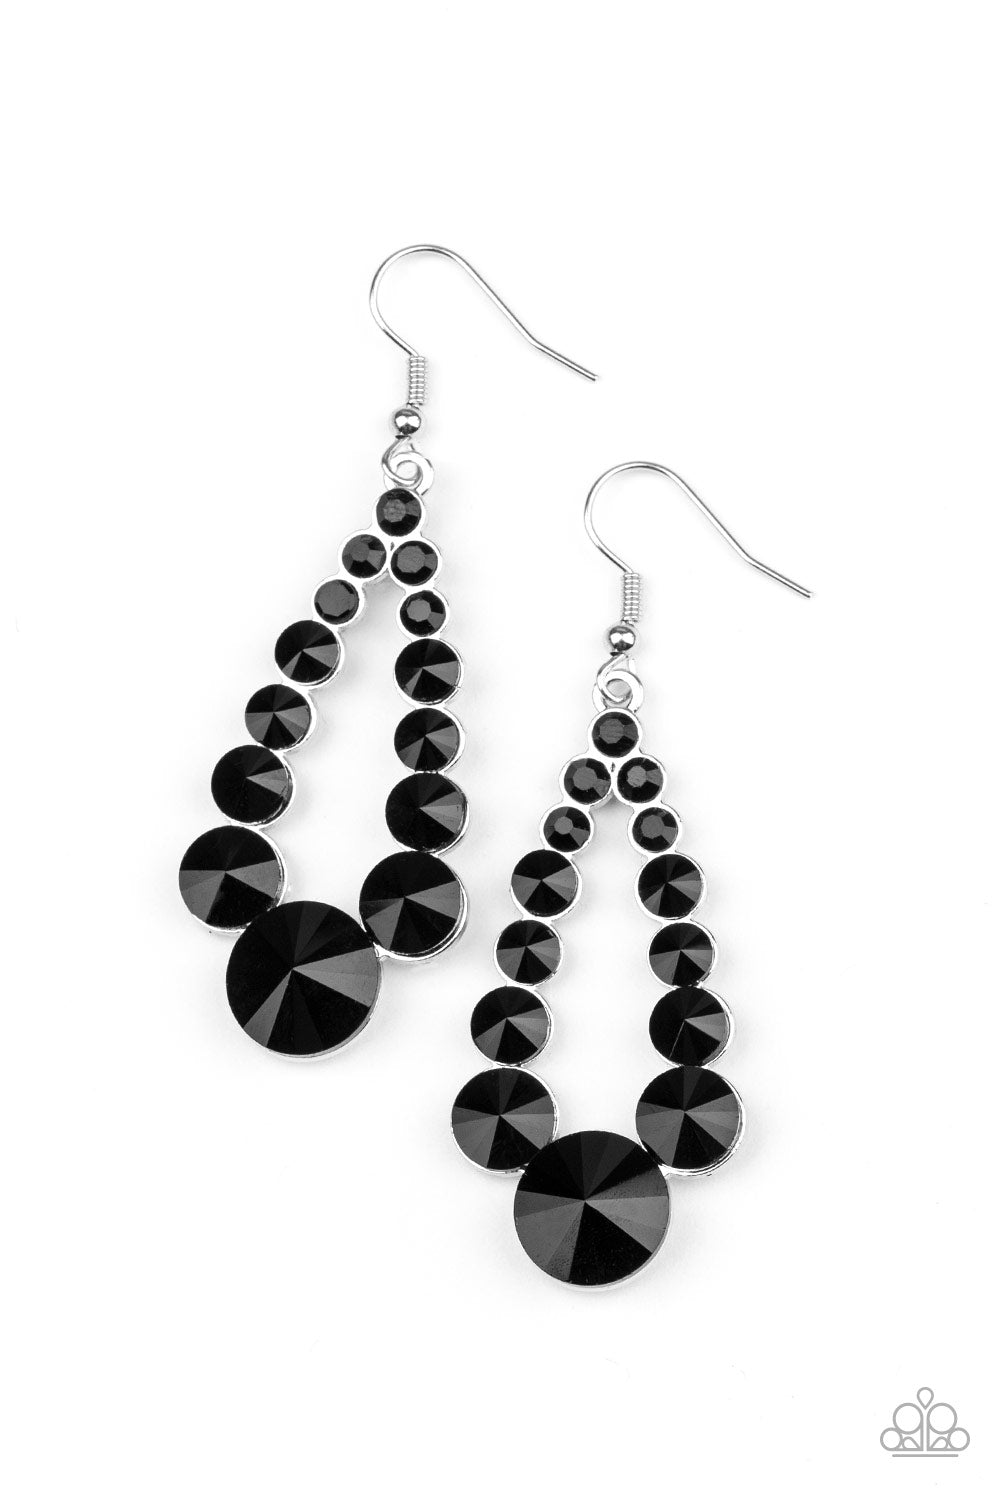 Gradually increasing in size, glittery black rhinestones coalesce into a glamorous teardrop frame for a refined look. Earring attaches to a standard fishhook fitting.